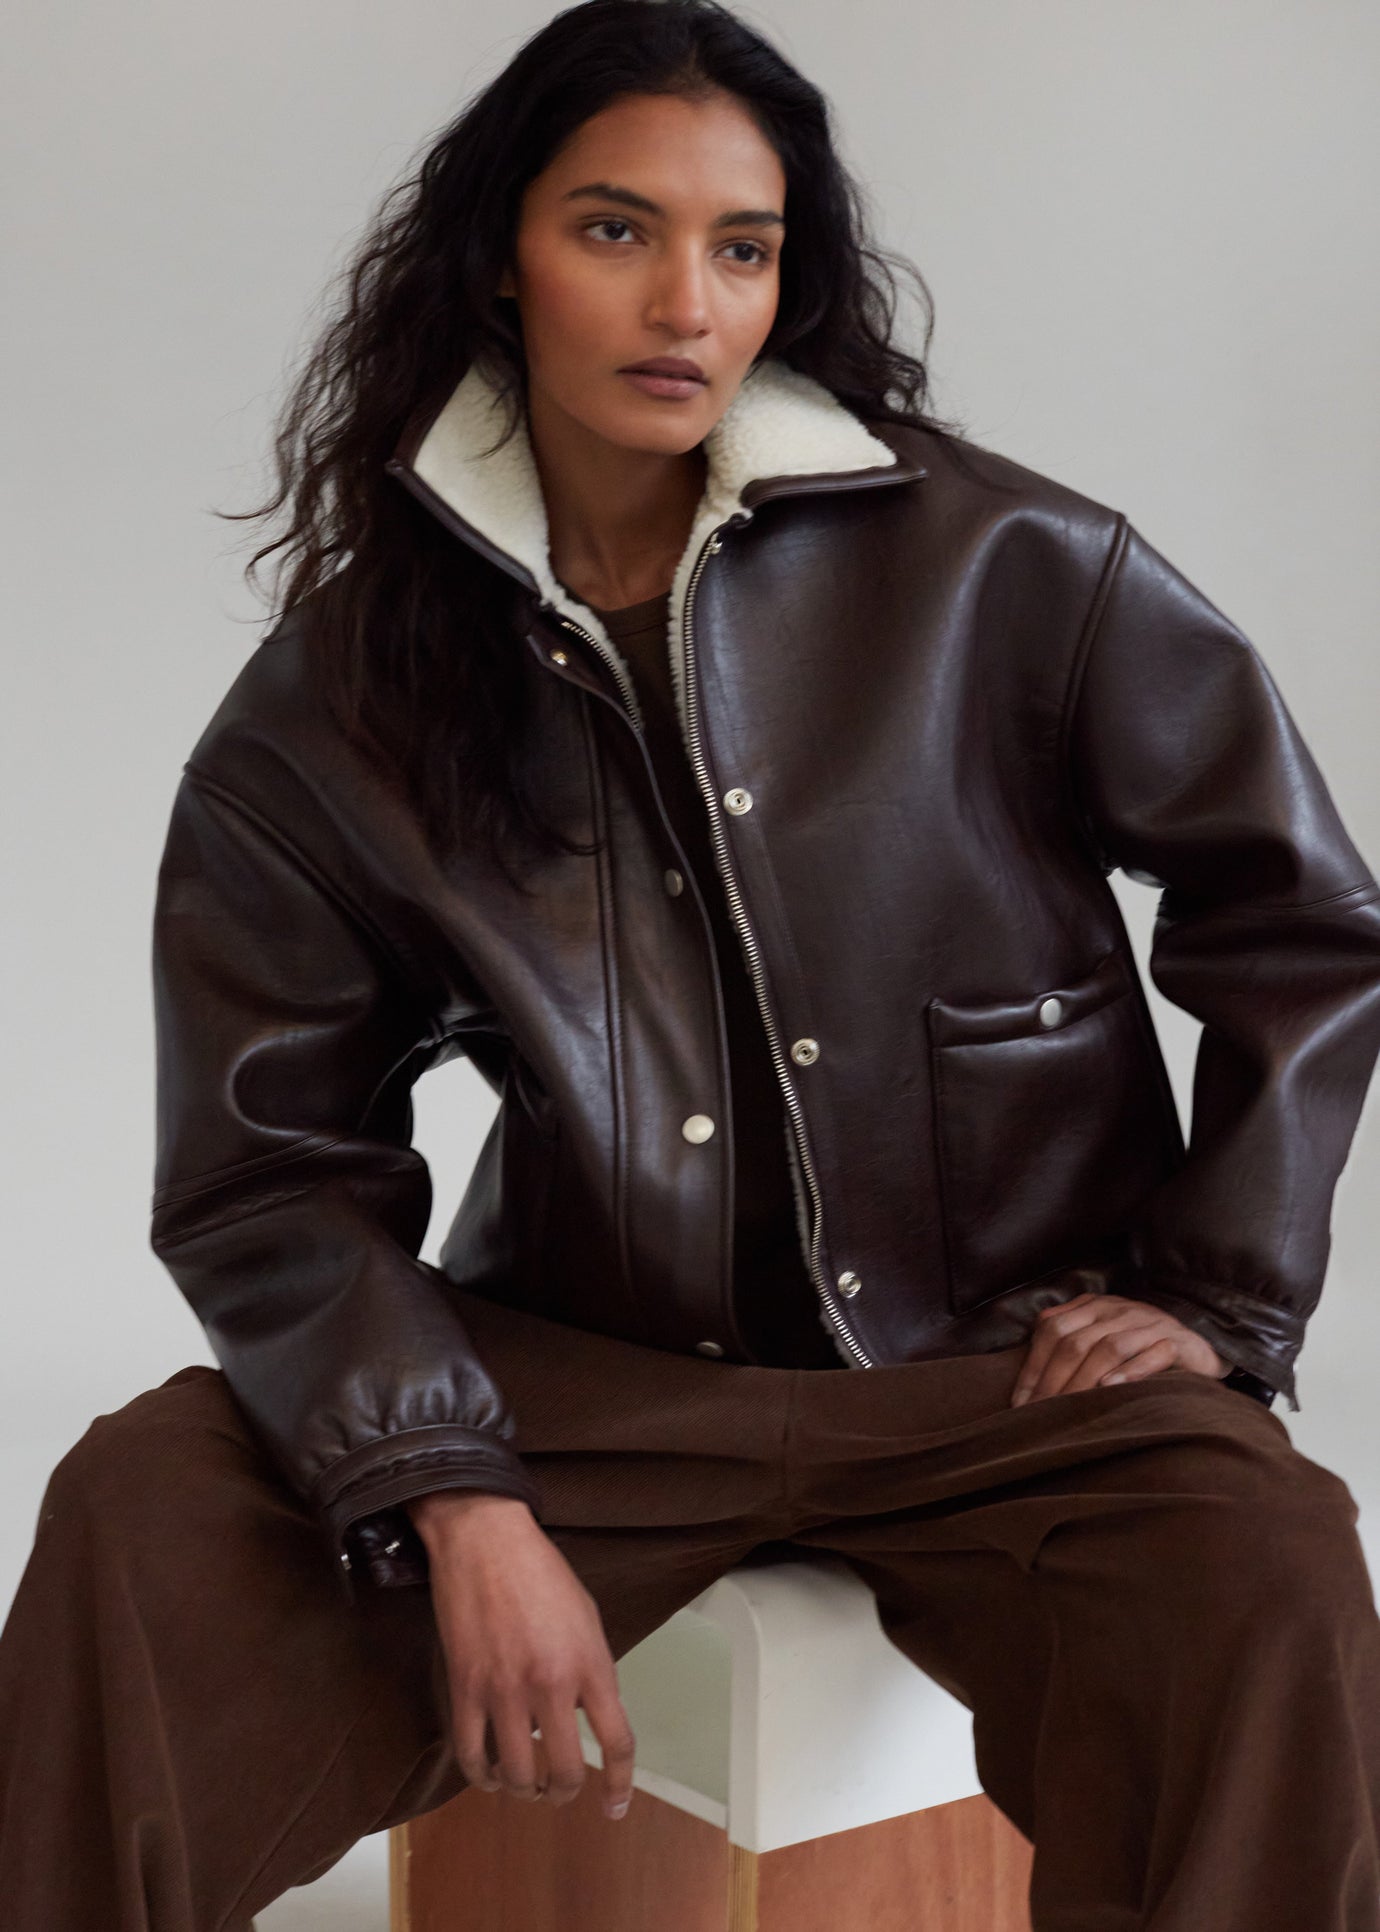 Arin Faux Leather Jacket - Brown